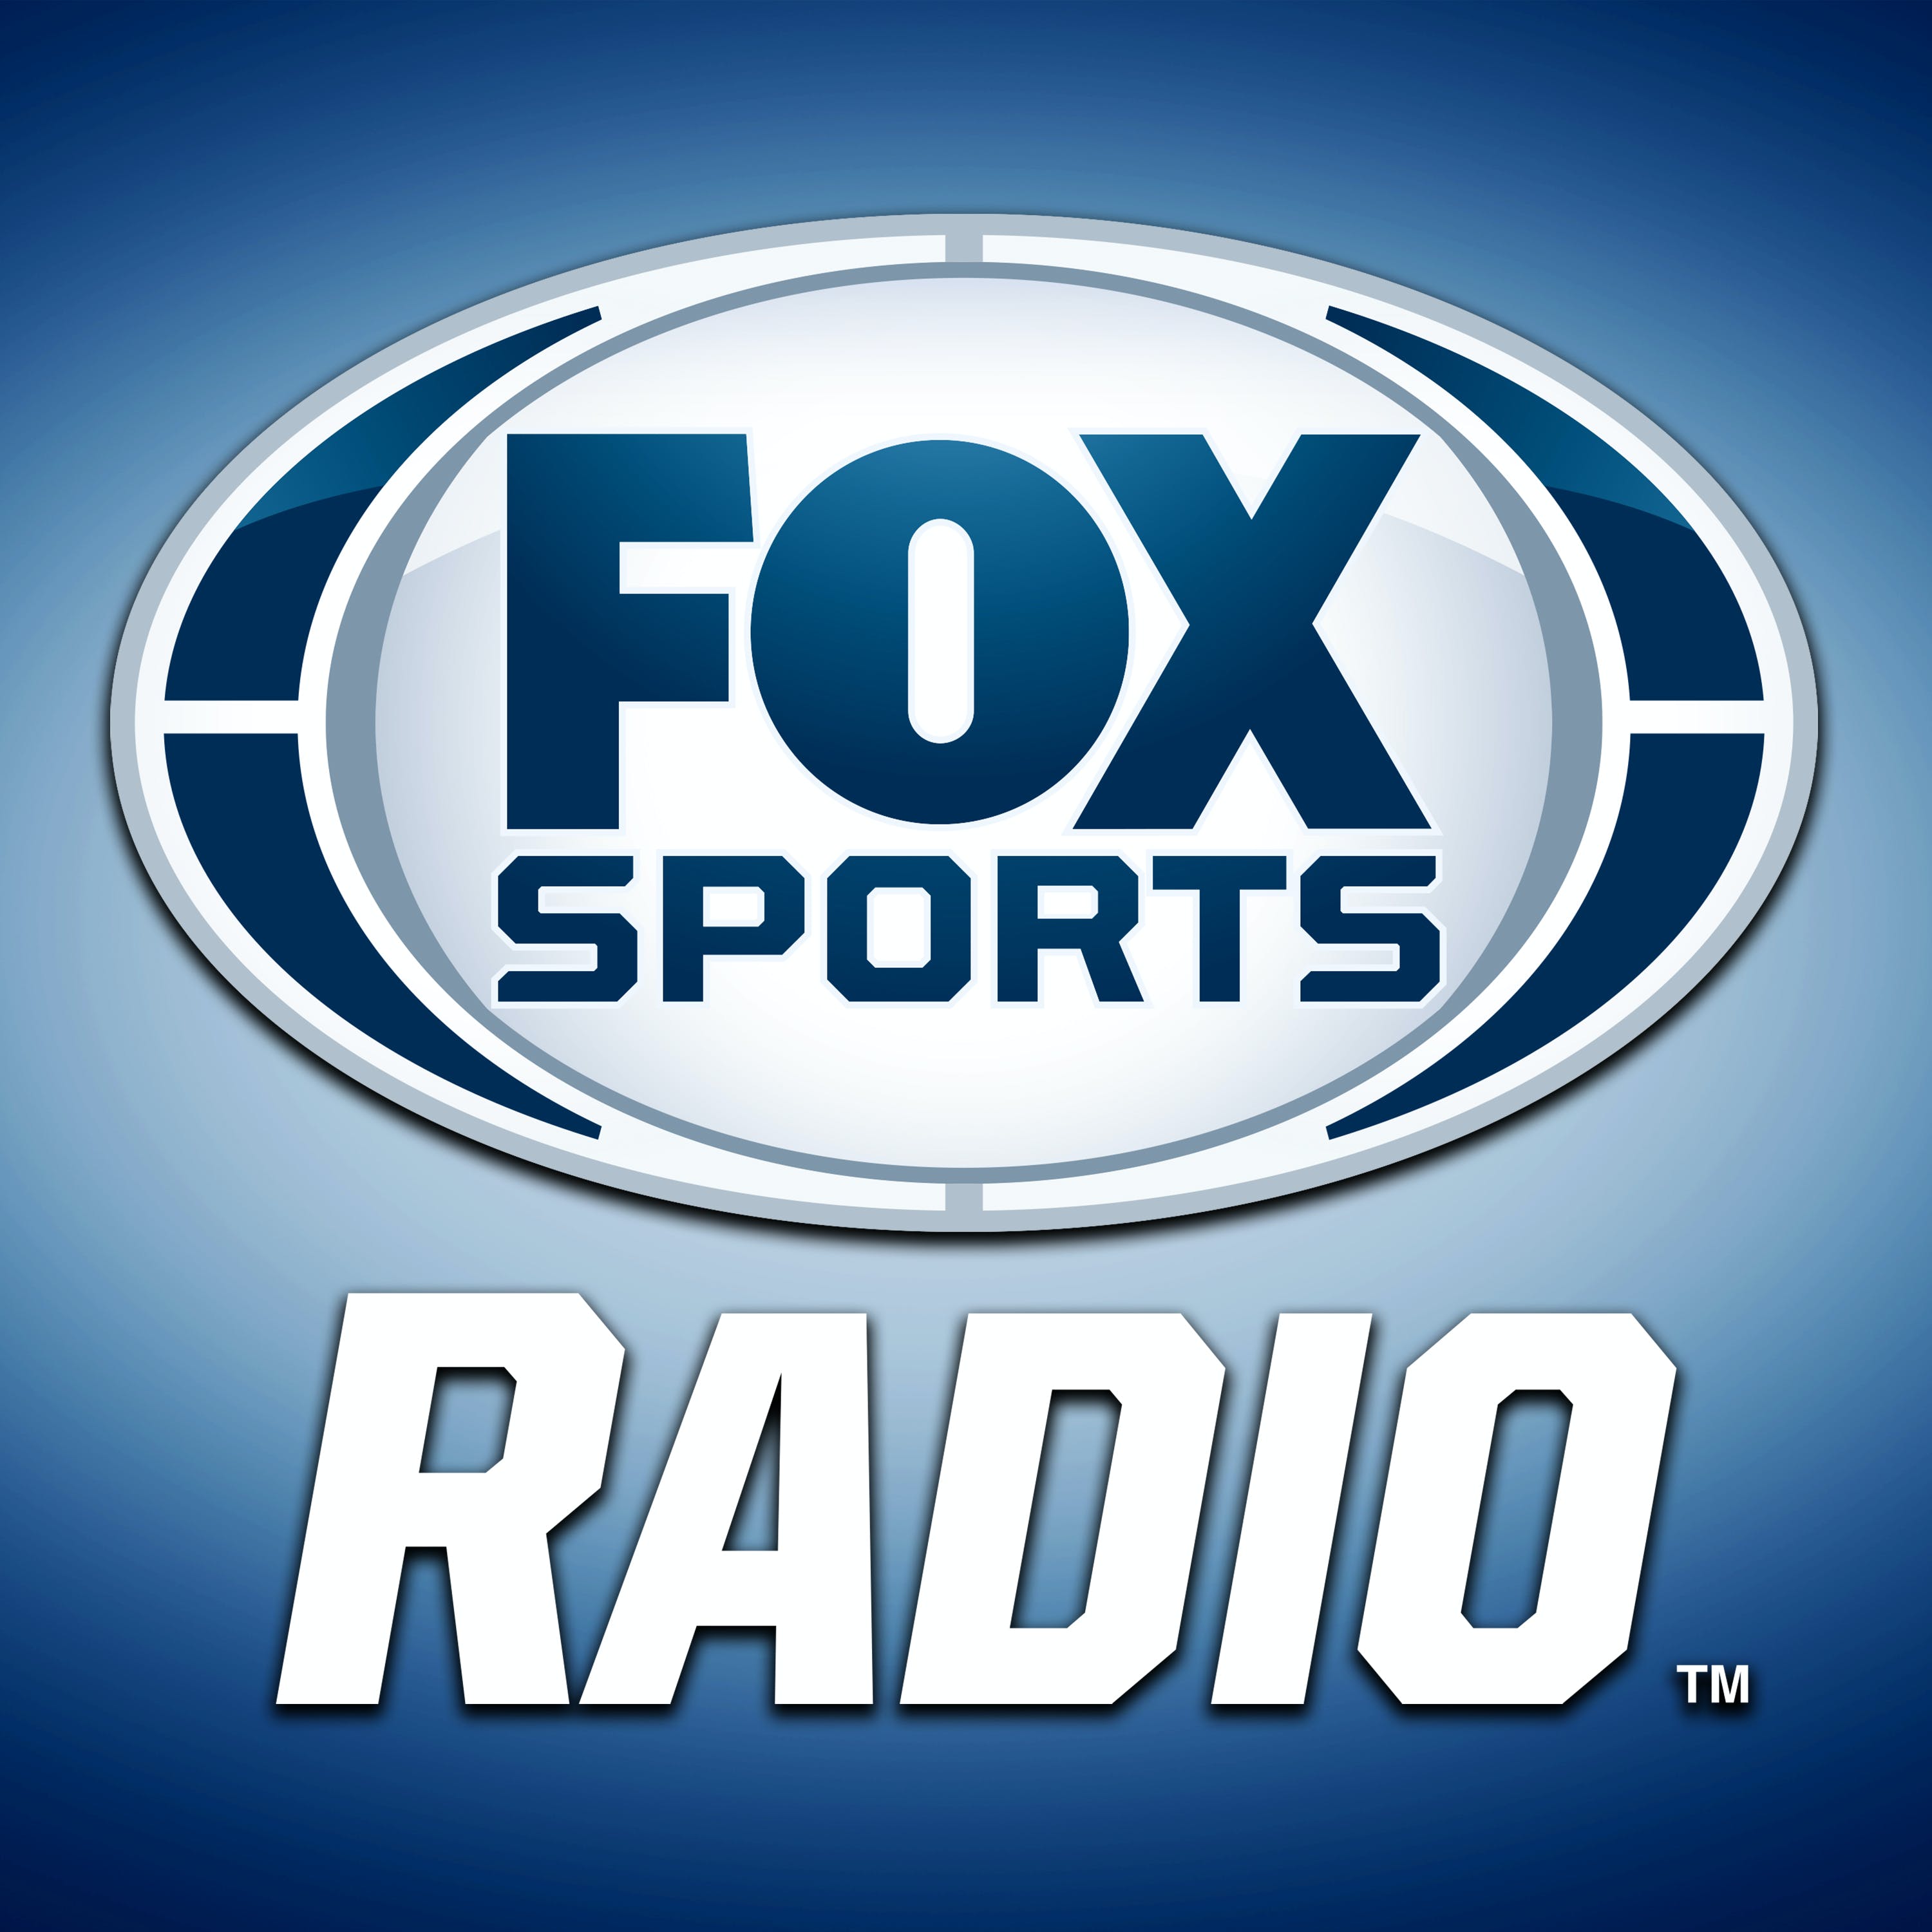 11/08/2020 FOX Sports Red Zone Radio with Hartman and Ohrnberger- NFL Week 9 highlights and analysis, Joe Davis